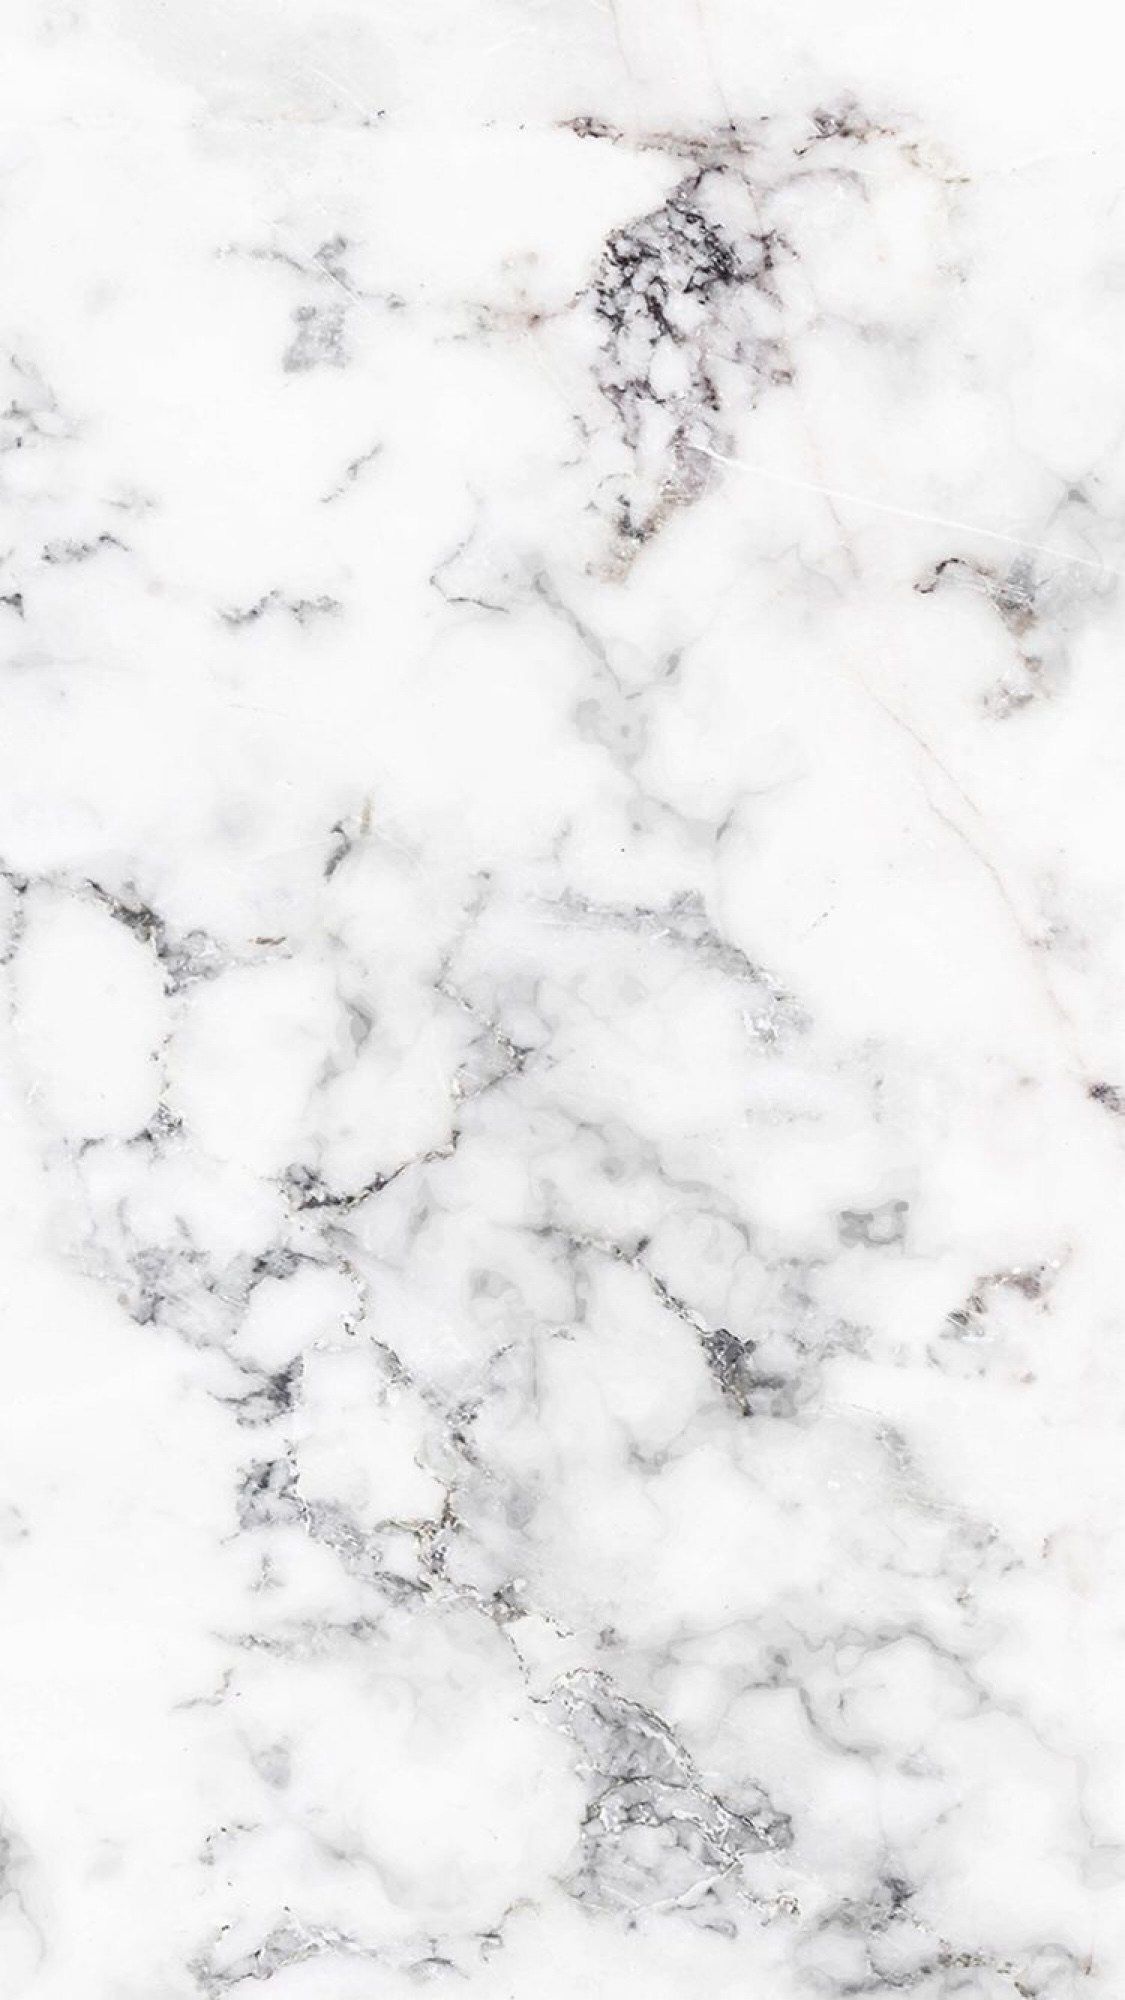 White, Monochrome, Black And White, Marble. IPhone Wallpaper , Marble Iphone Wallpaper, Marble Wallpaper Phone